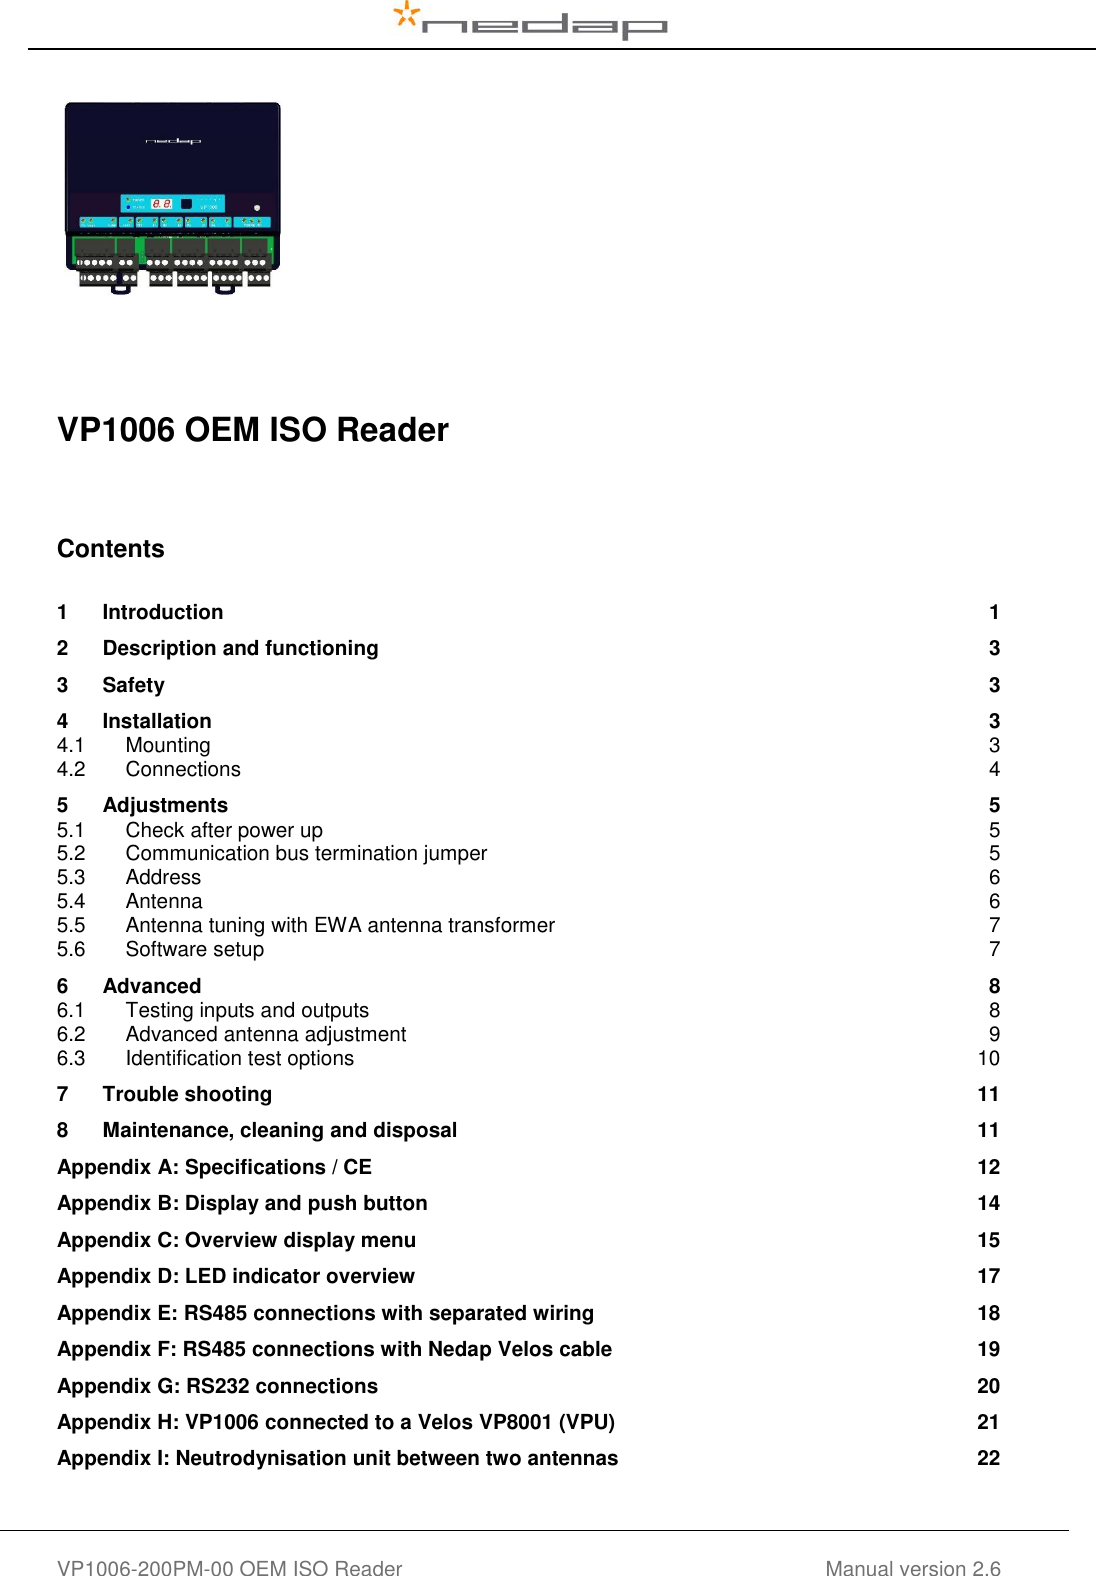   VP1006-200PM-00 OEM ISO Reader Manual version 2.6         VP1006 OEM ISO Reader     Contents  1 Introduction  1 2 Description and functioning  3 3 Safety  3 4 Installation  3 4.1 Mounting  3 4.2 Connections  4 5 Adjustments  5 5.1 Check after power up  5 5.2 Communication bus termination jumper  5 5.3 Address  6 5.4 Antenna  6 5.5 Antenna tuning with EWA antenna transformer  7 5.6 Software setup  7 6 Advanced  8 6.1 Testing inputs and outputs  8 6.2 Advanced antenna adjustment  9 6.3 Identification test options  10 7 Trouble shooting  11 8 Maintenance, cleaning and disposal  11 Appendix A: Specifications / CE  12 Appendix B: Display and push button  14 Appendix C: Overview display menu  15 Appendix D: LED indicator overview  17 Appendix E: RS485 connections with separated wiring  18 Appendix F: RS485 connections with Nedap Velos cable  19 Appendix G: RS232 connections  20 Appendix H: VP1006 connected to a Velos VP8001 (VPU)  21 Appendix I: Neutrodynisation unit between two antennas  22    